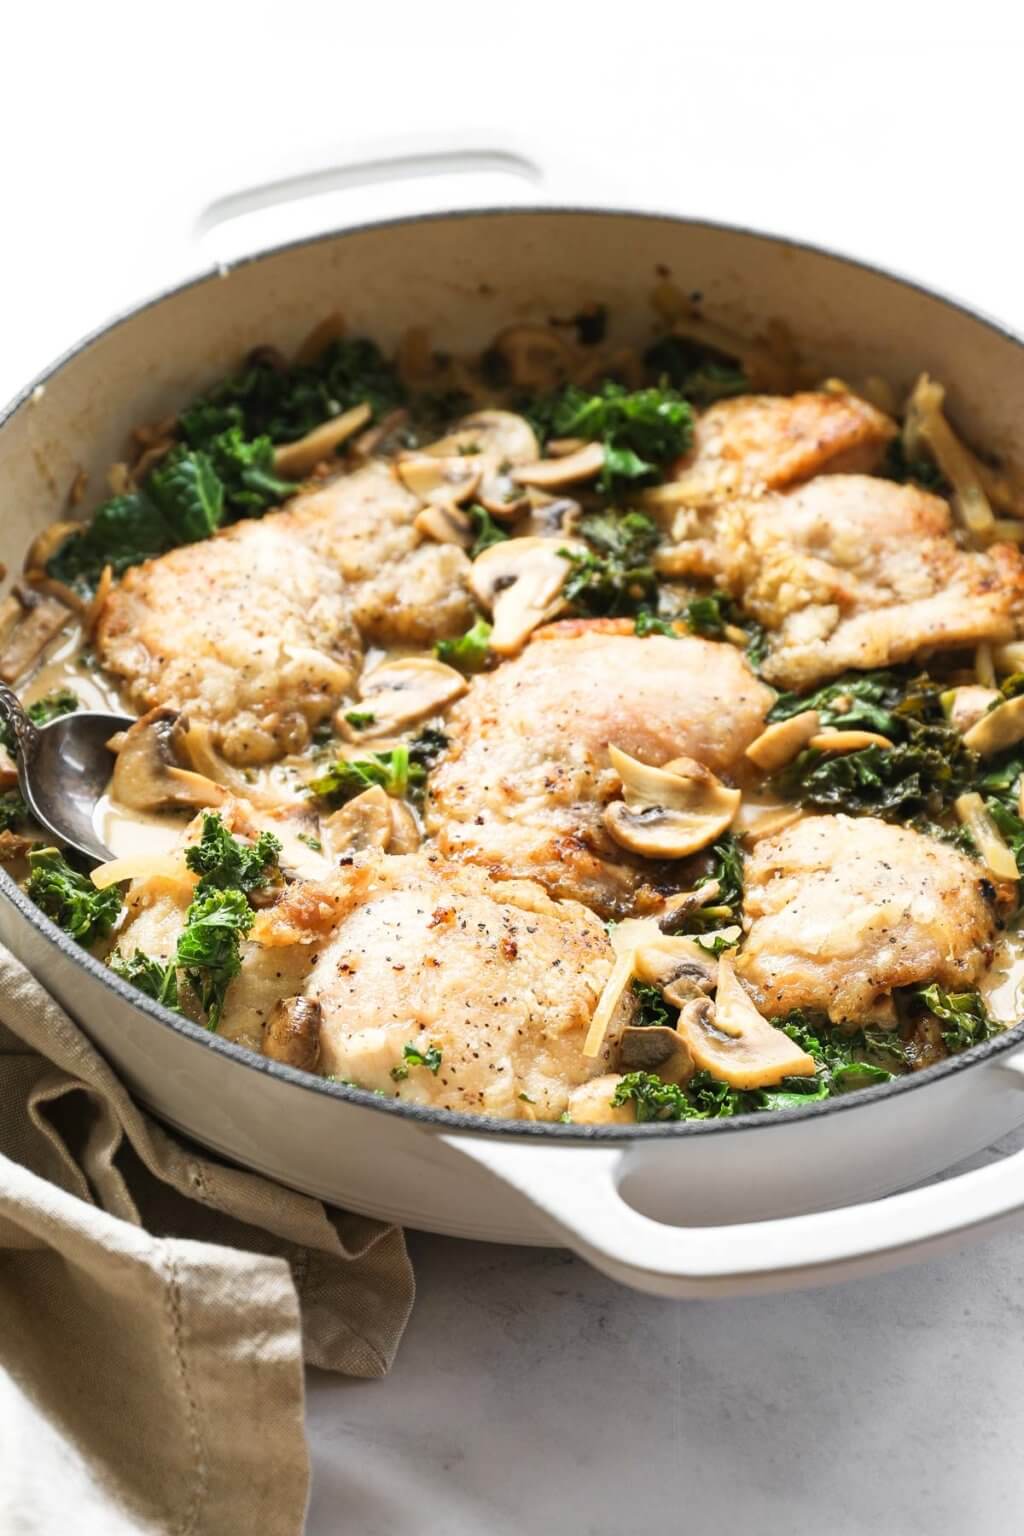 Stovetop Creamy Mushroom Chicken Thighs (Dairy Free) - Real Simple Good